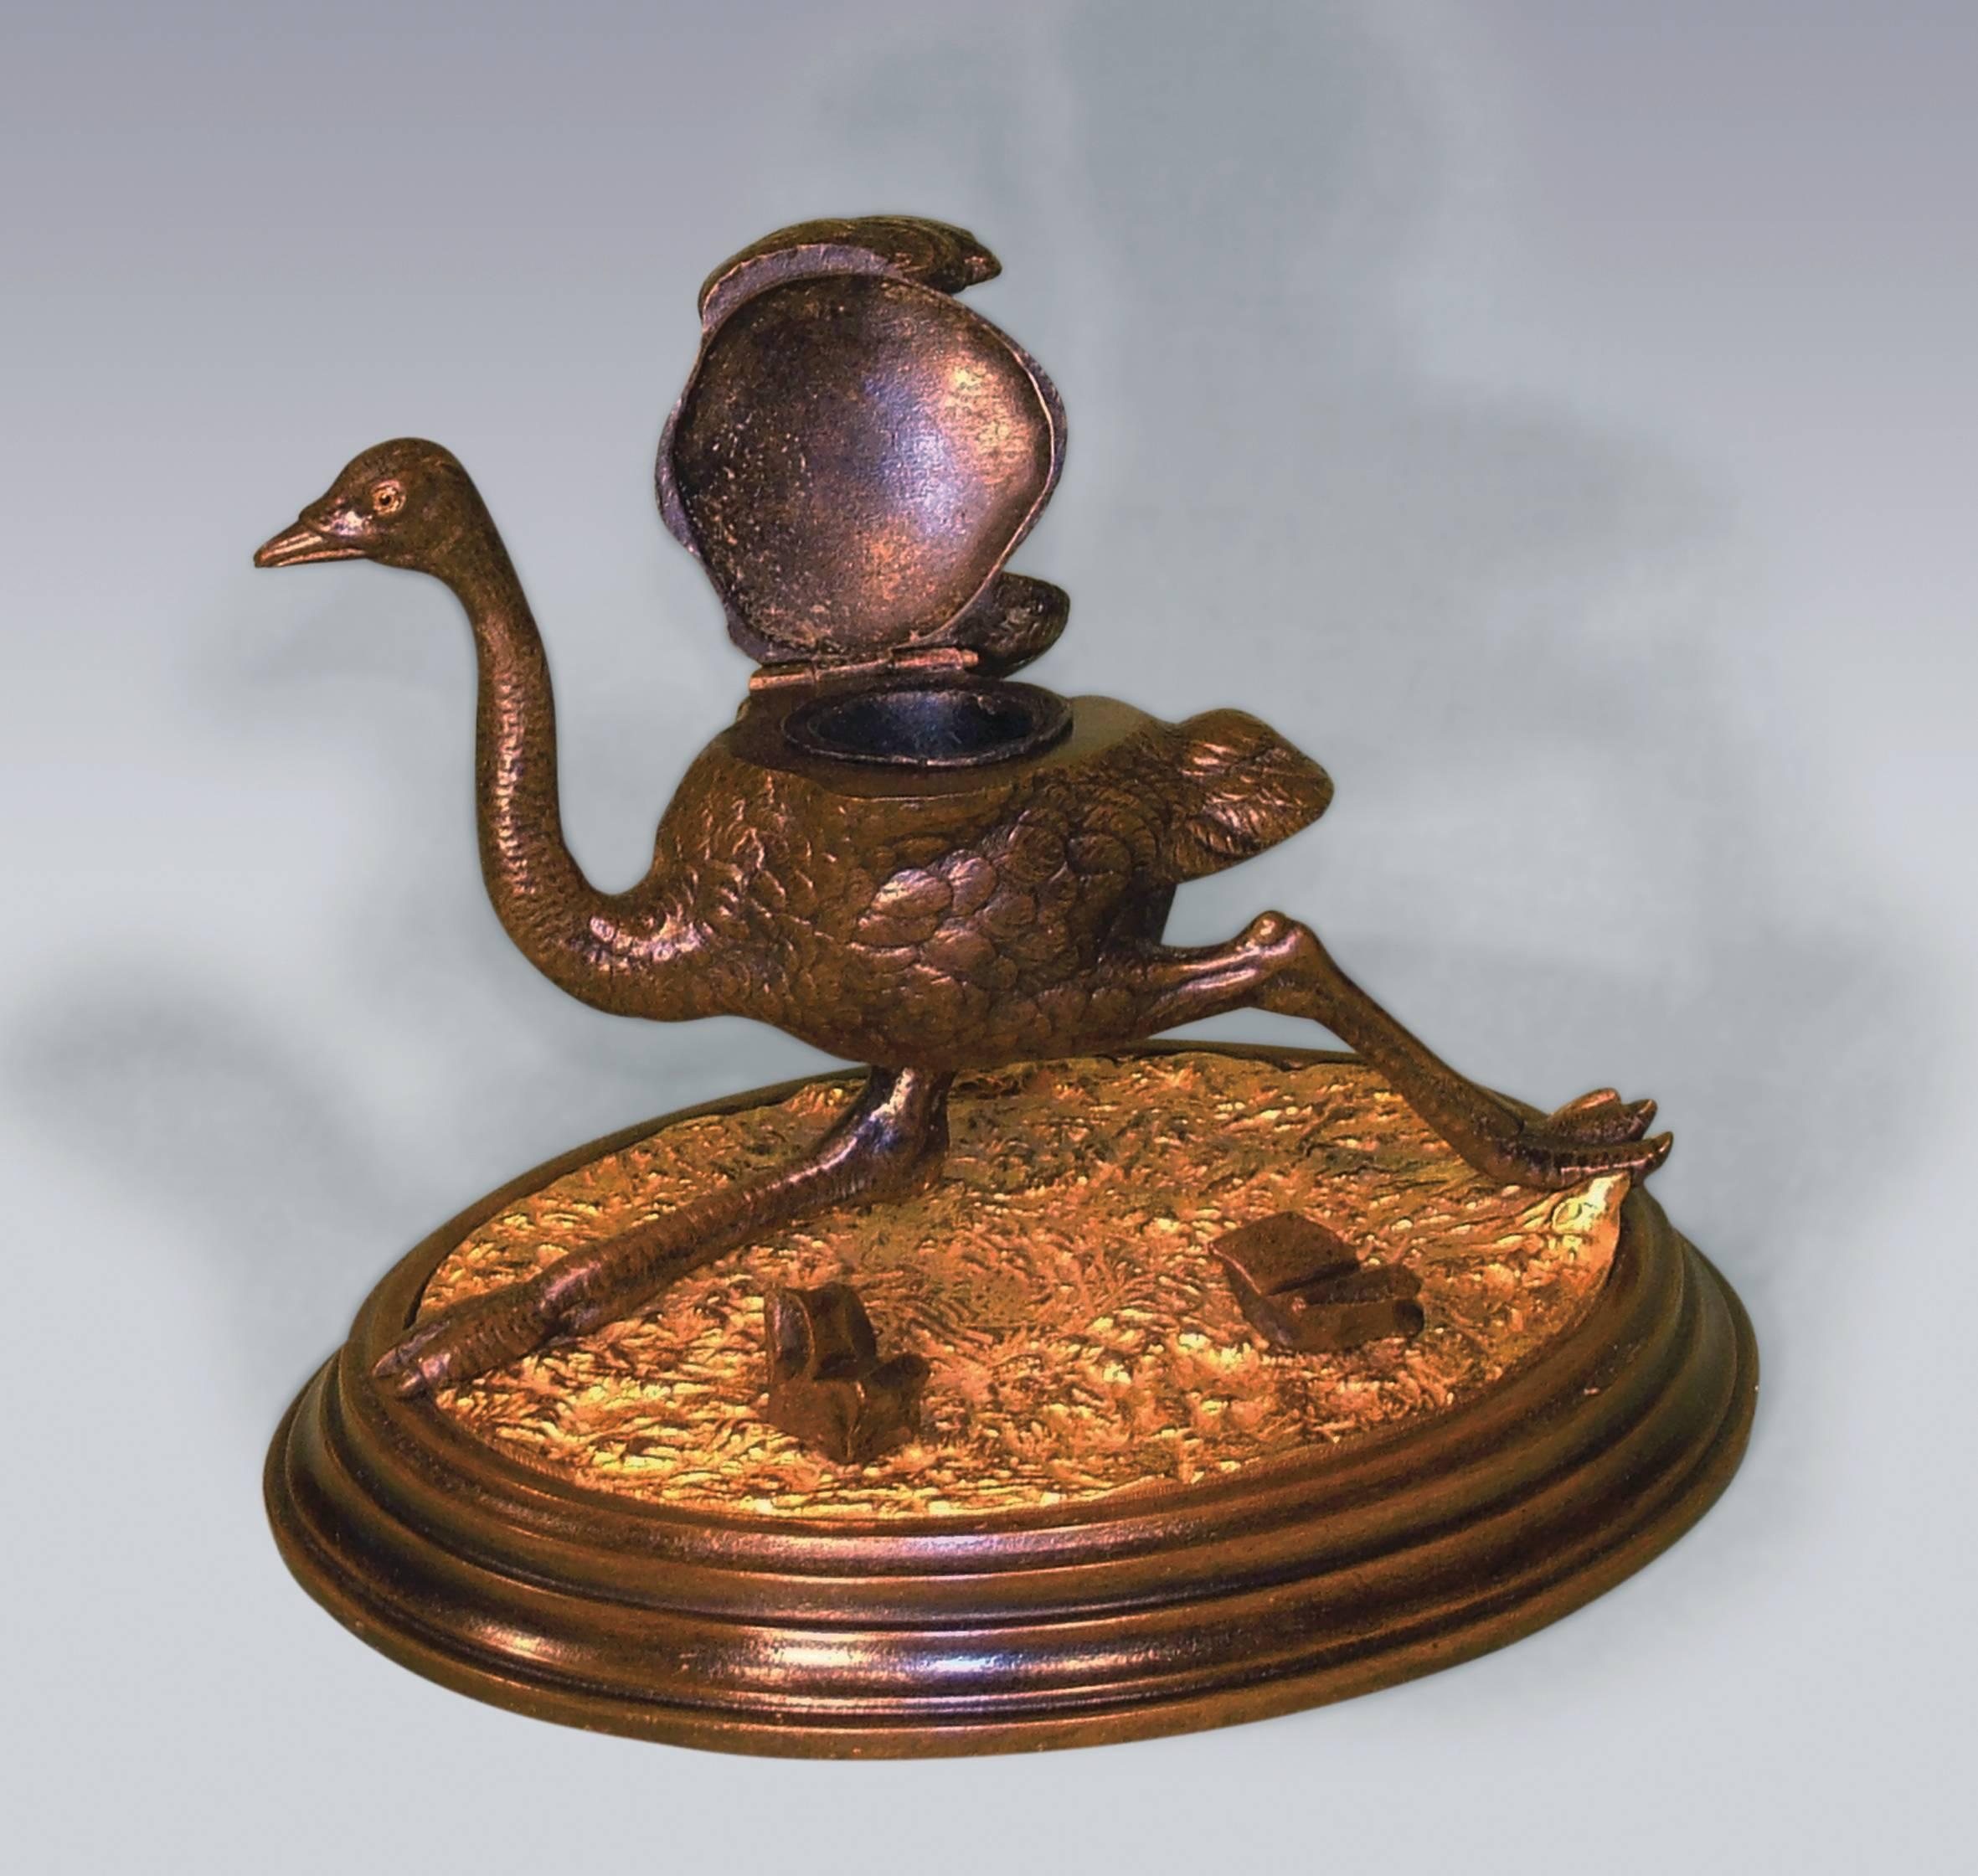 An unusual 19th century bronze and ormolu Inkwell, in the form of running Ostrich with hinged lid, mounted on oval base with fallen rocks for use as a pen holder, ending on moulded plinth base.